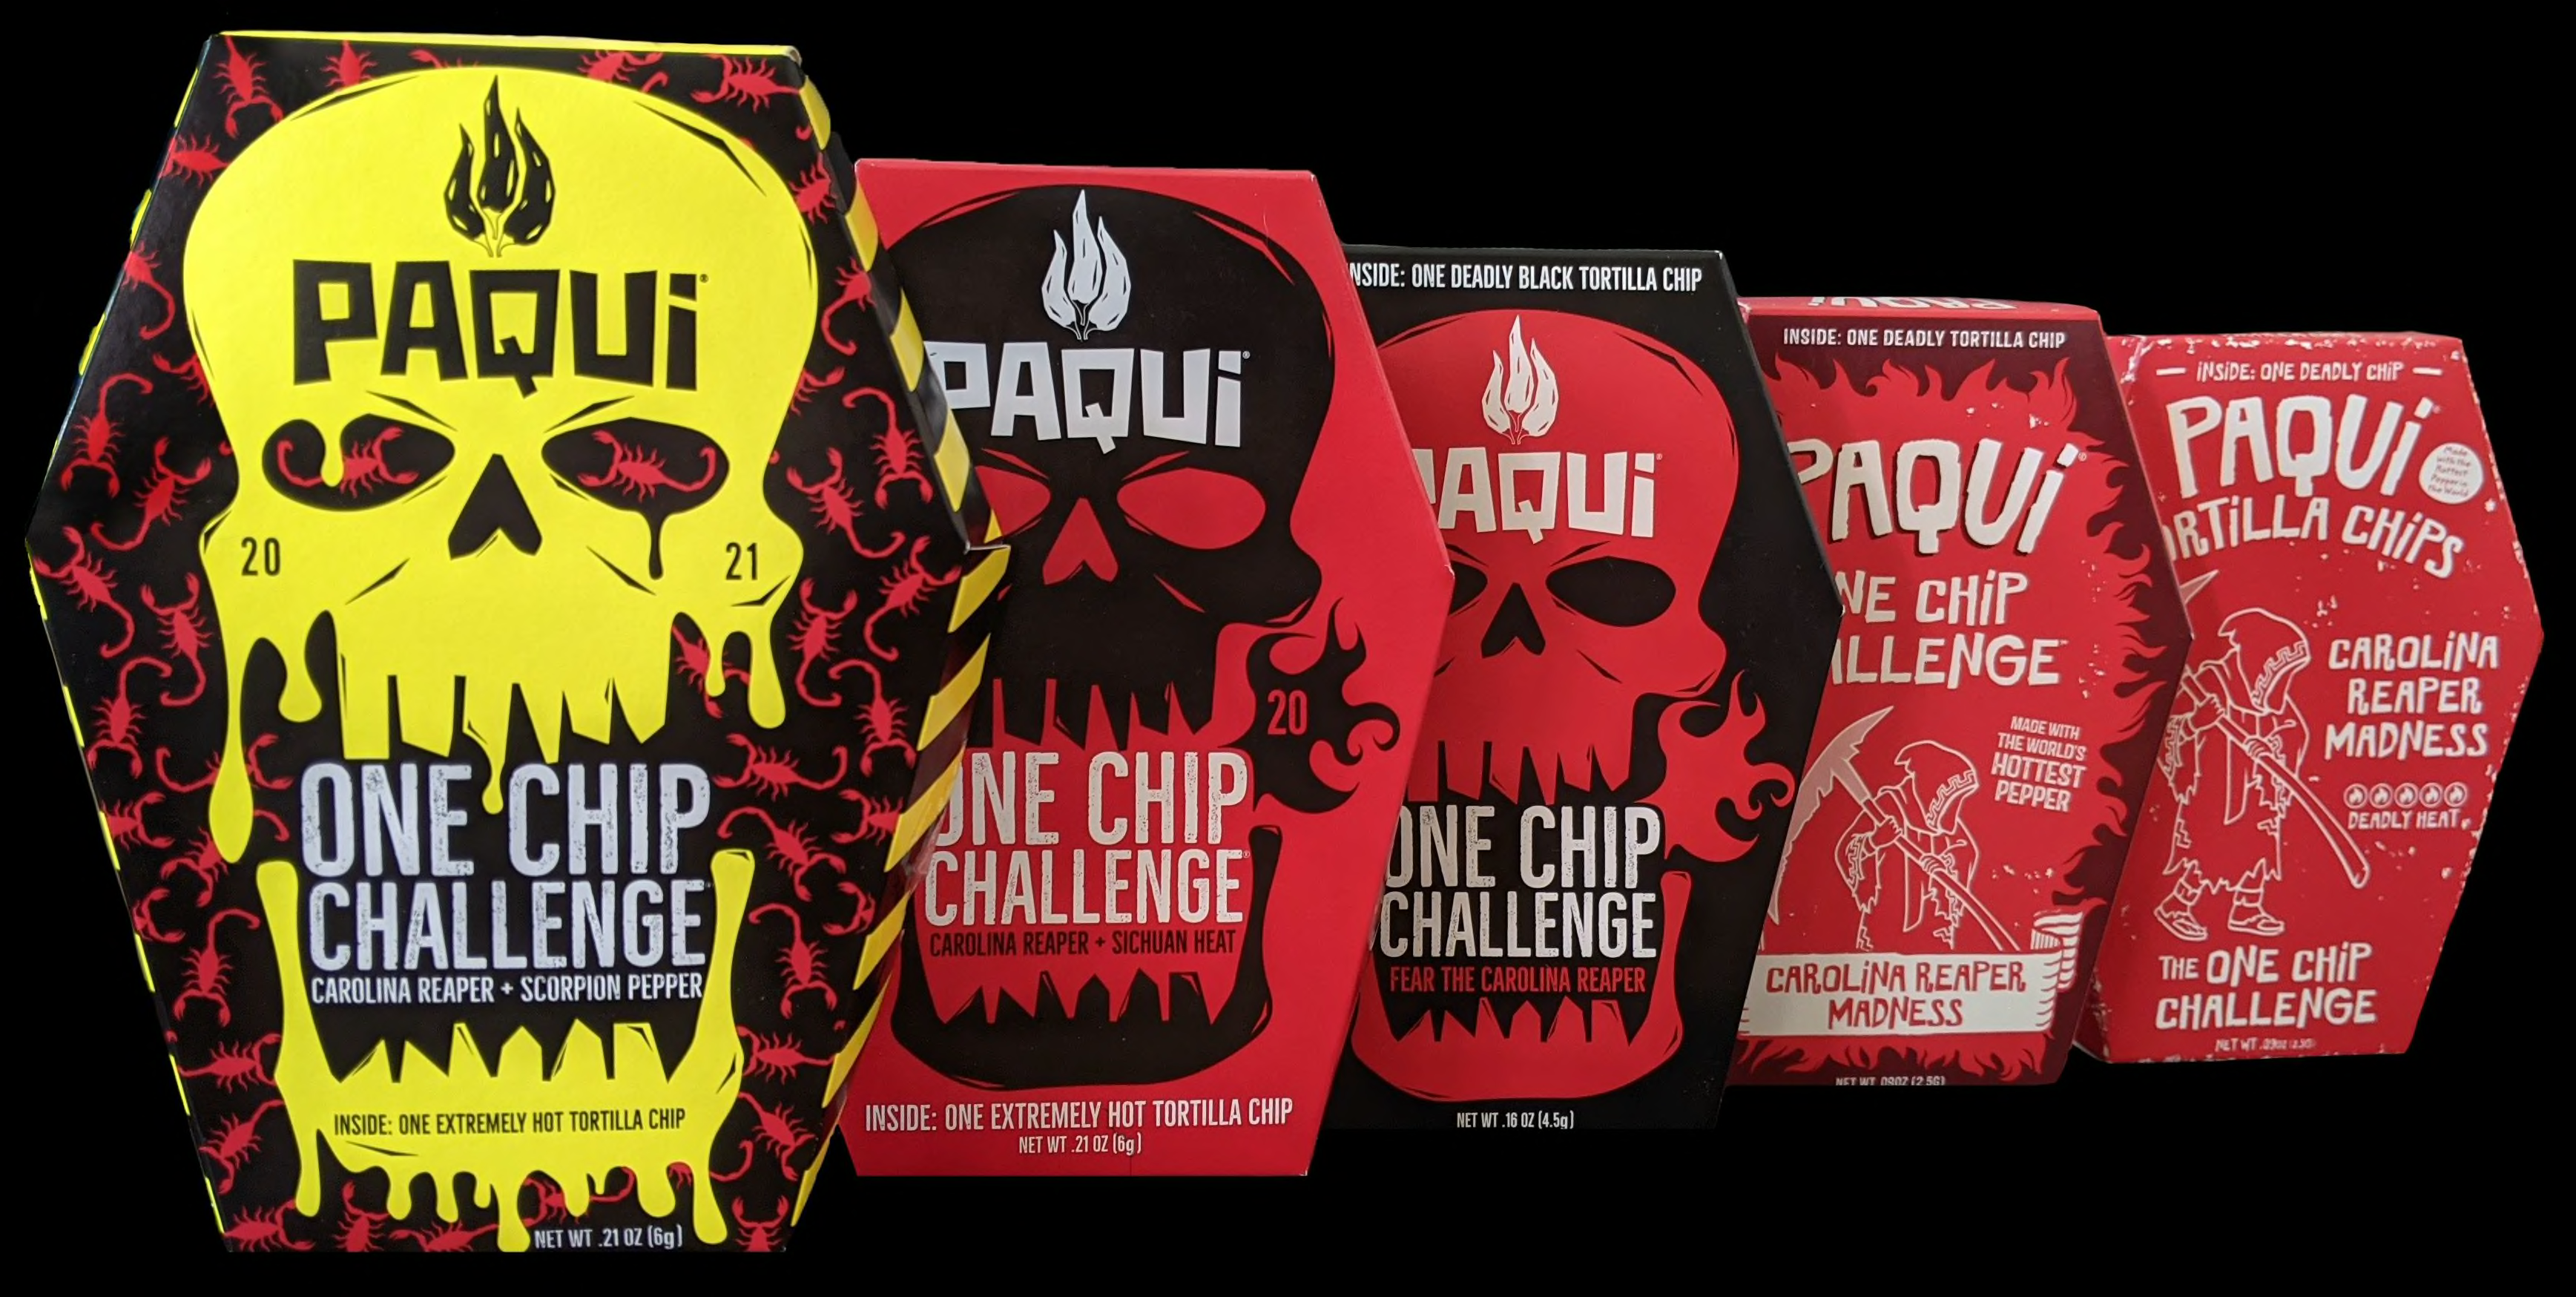 The Paqui One Chip Challenge Where can you buy the One Chip?